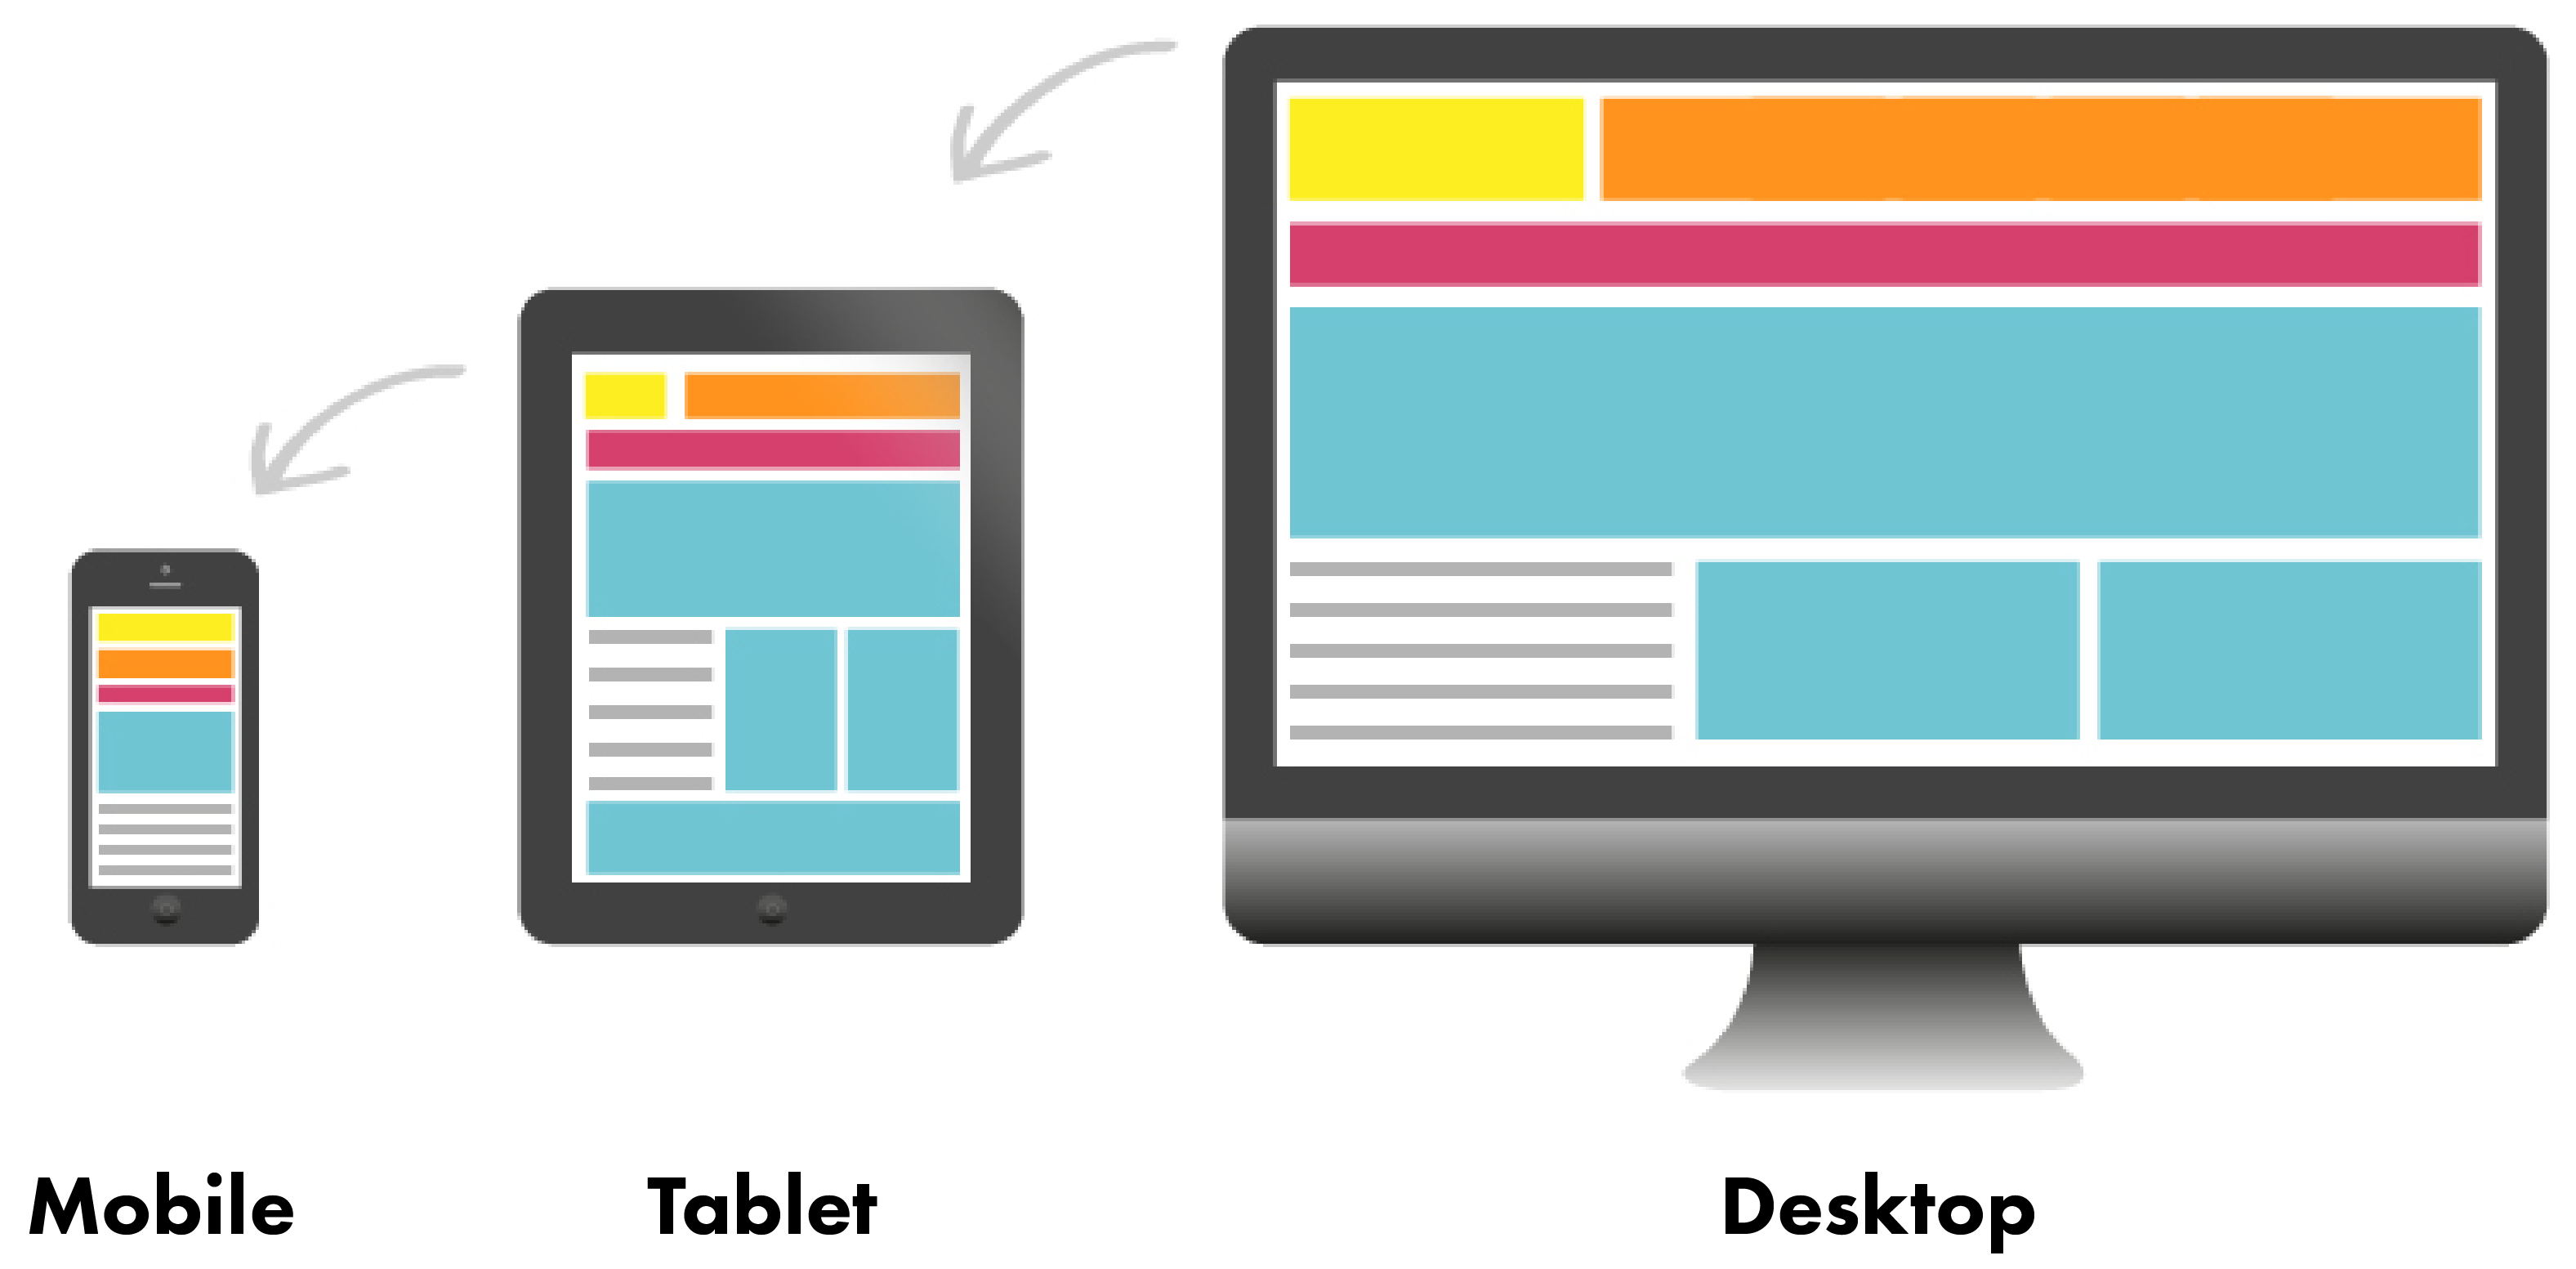 Side by side comparisons of a mobile phone, tablet and desktop screen with how the layout changes based on screen size.